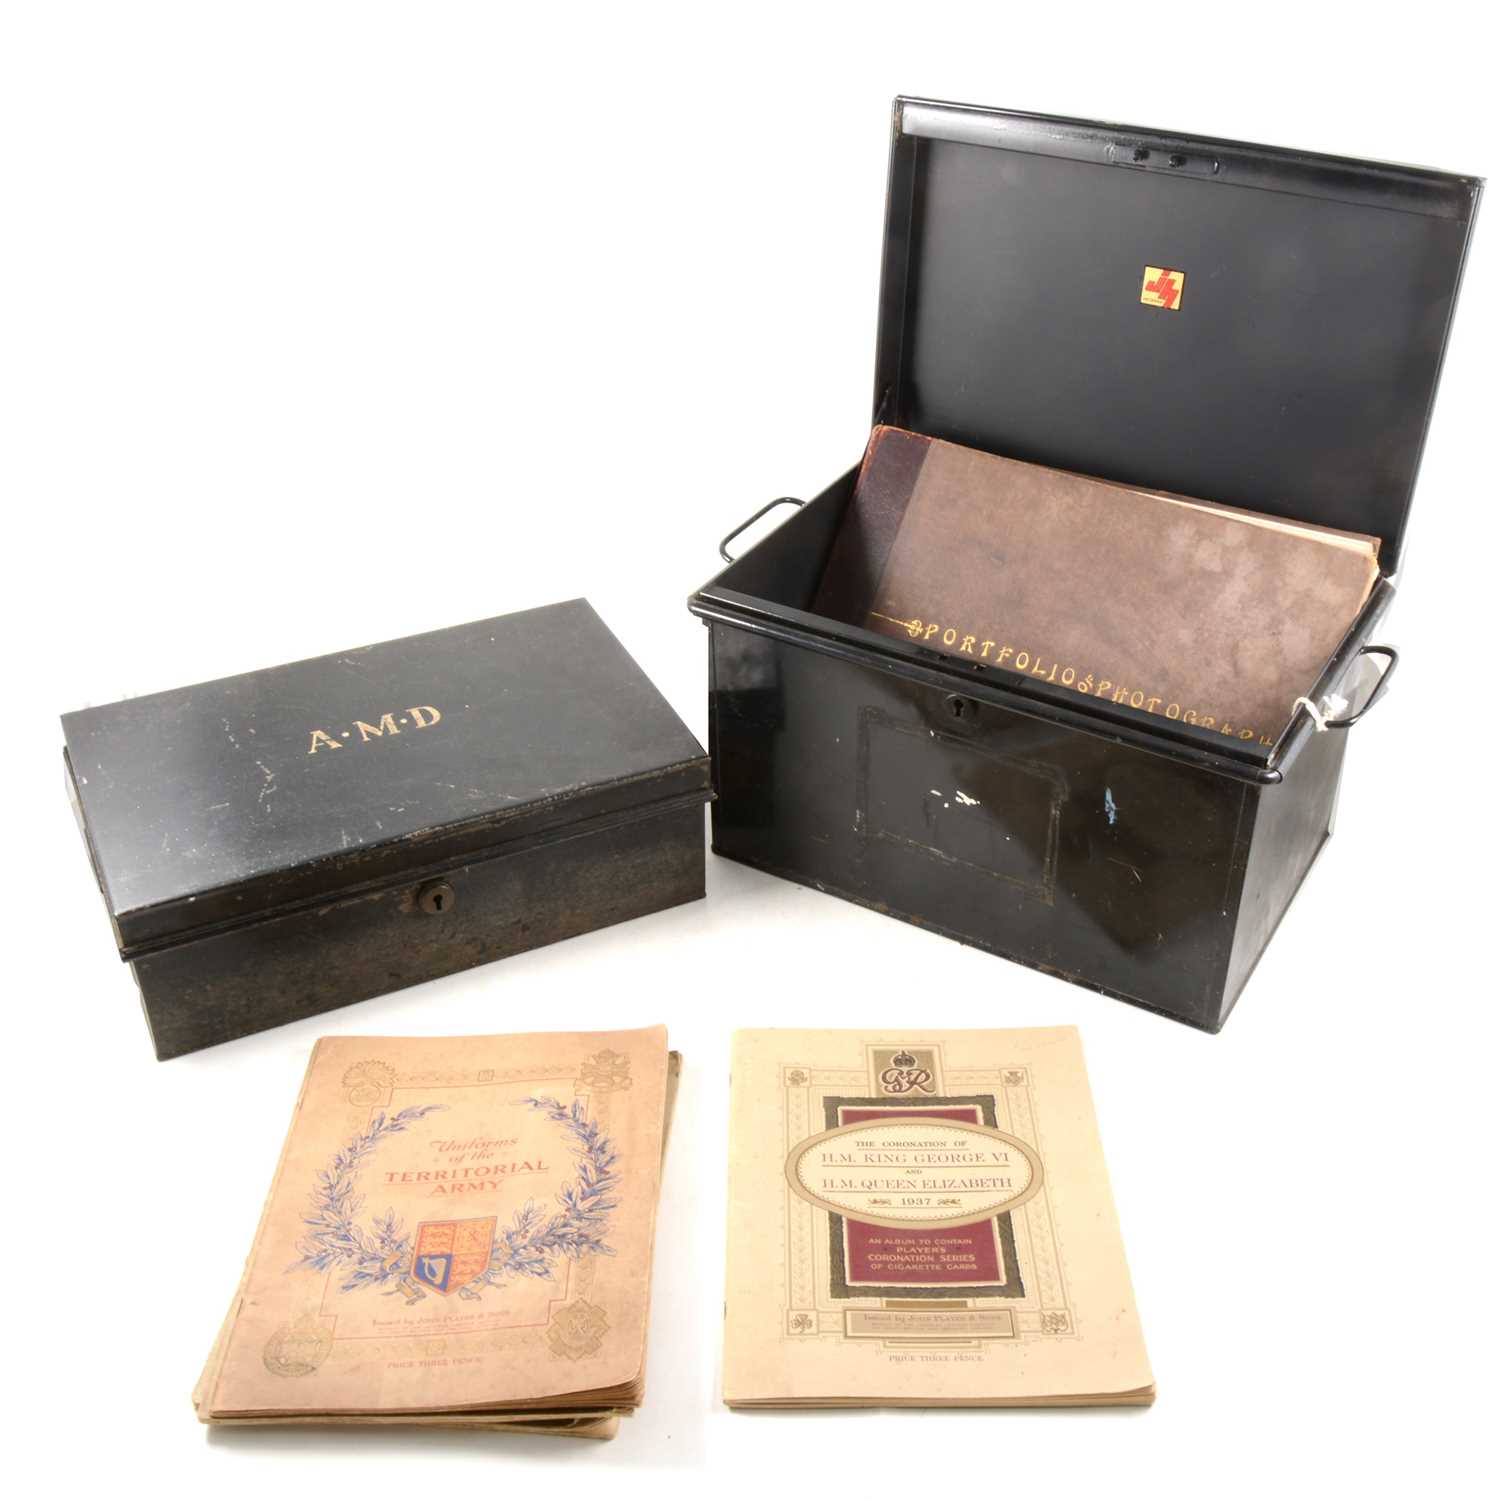 Lot 140 - Two steel deed boxes with keys together with a comprehensive Edwardian Portfolio of Photographs